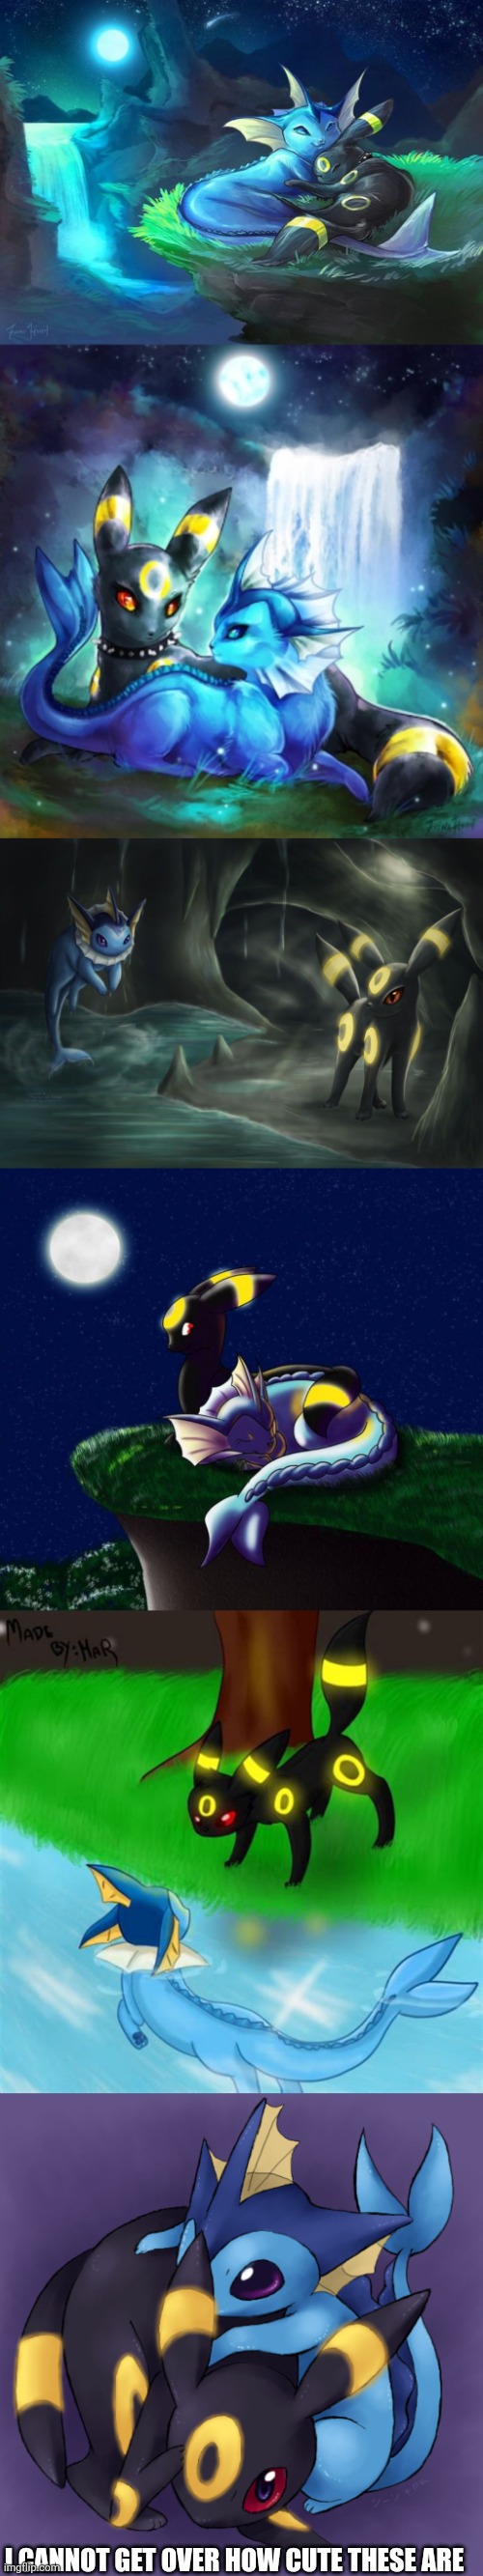 I CANNOT GET OVER HOW CUTE THESE ARE | image tagged in umbreon vaporeon ship 1,umbreon vaporeon ship 2,umbreon vaporeon ship 3,umbreon vaporeon ship 4,umbreon vaporeon ship 5,umbreon | made w/ Imgflip meme maker